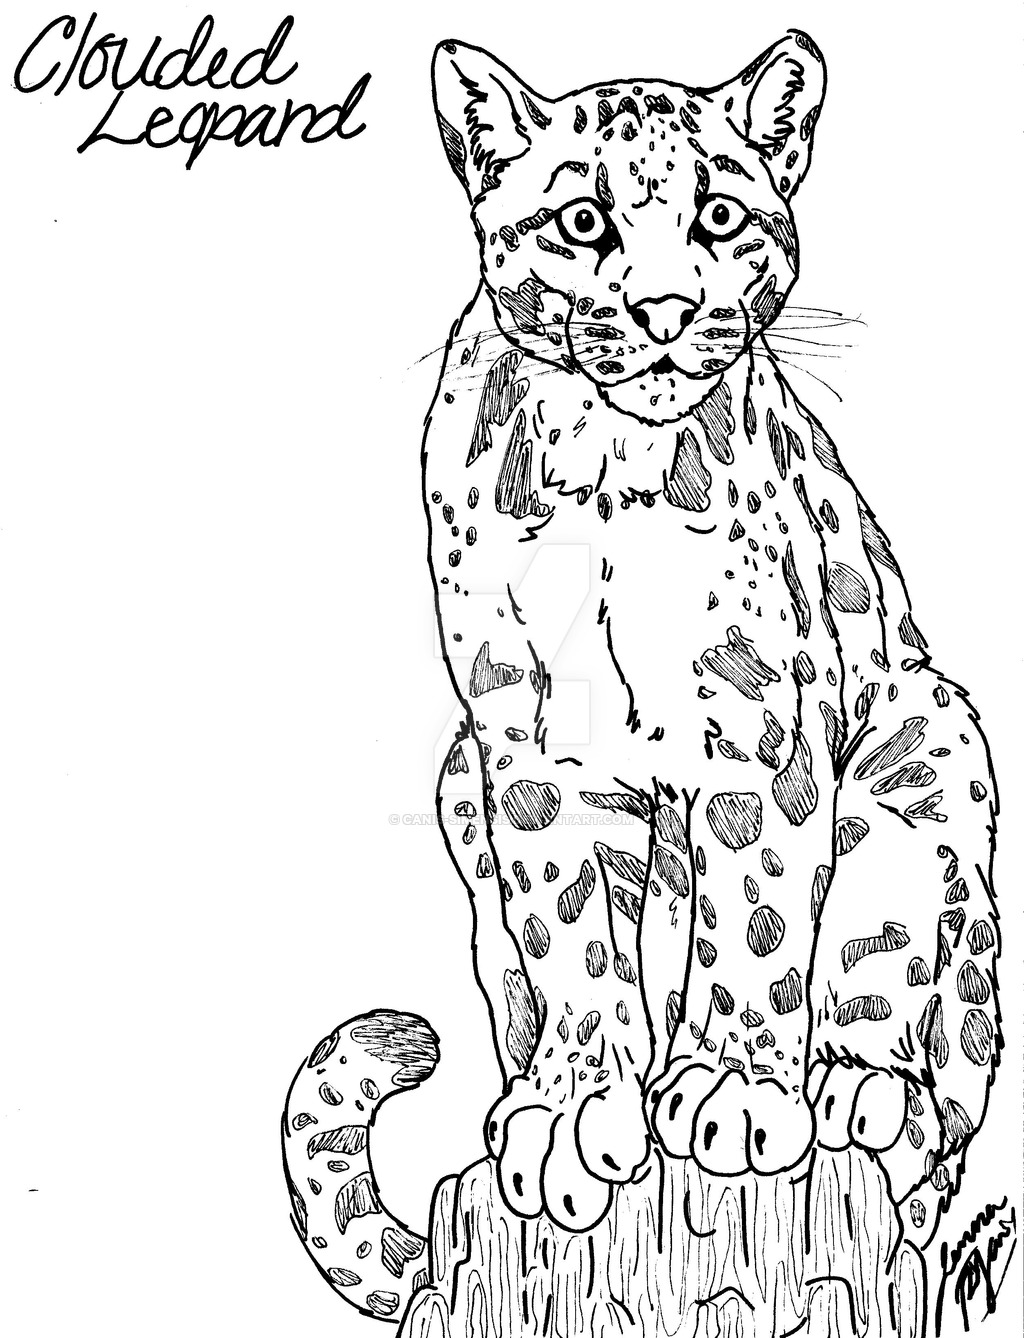 Clouded Leopard  coloring #6, Download drawings